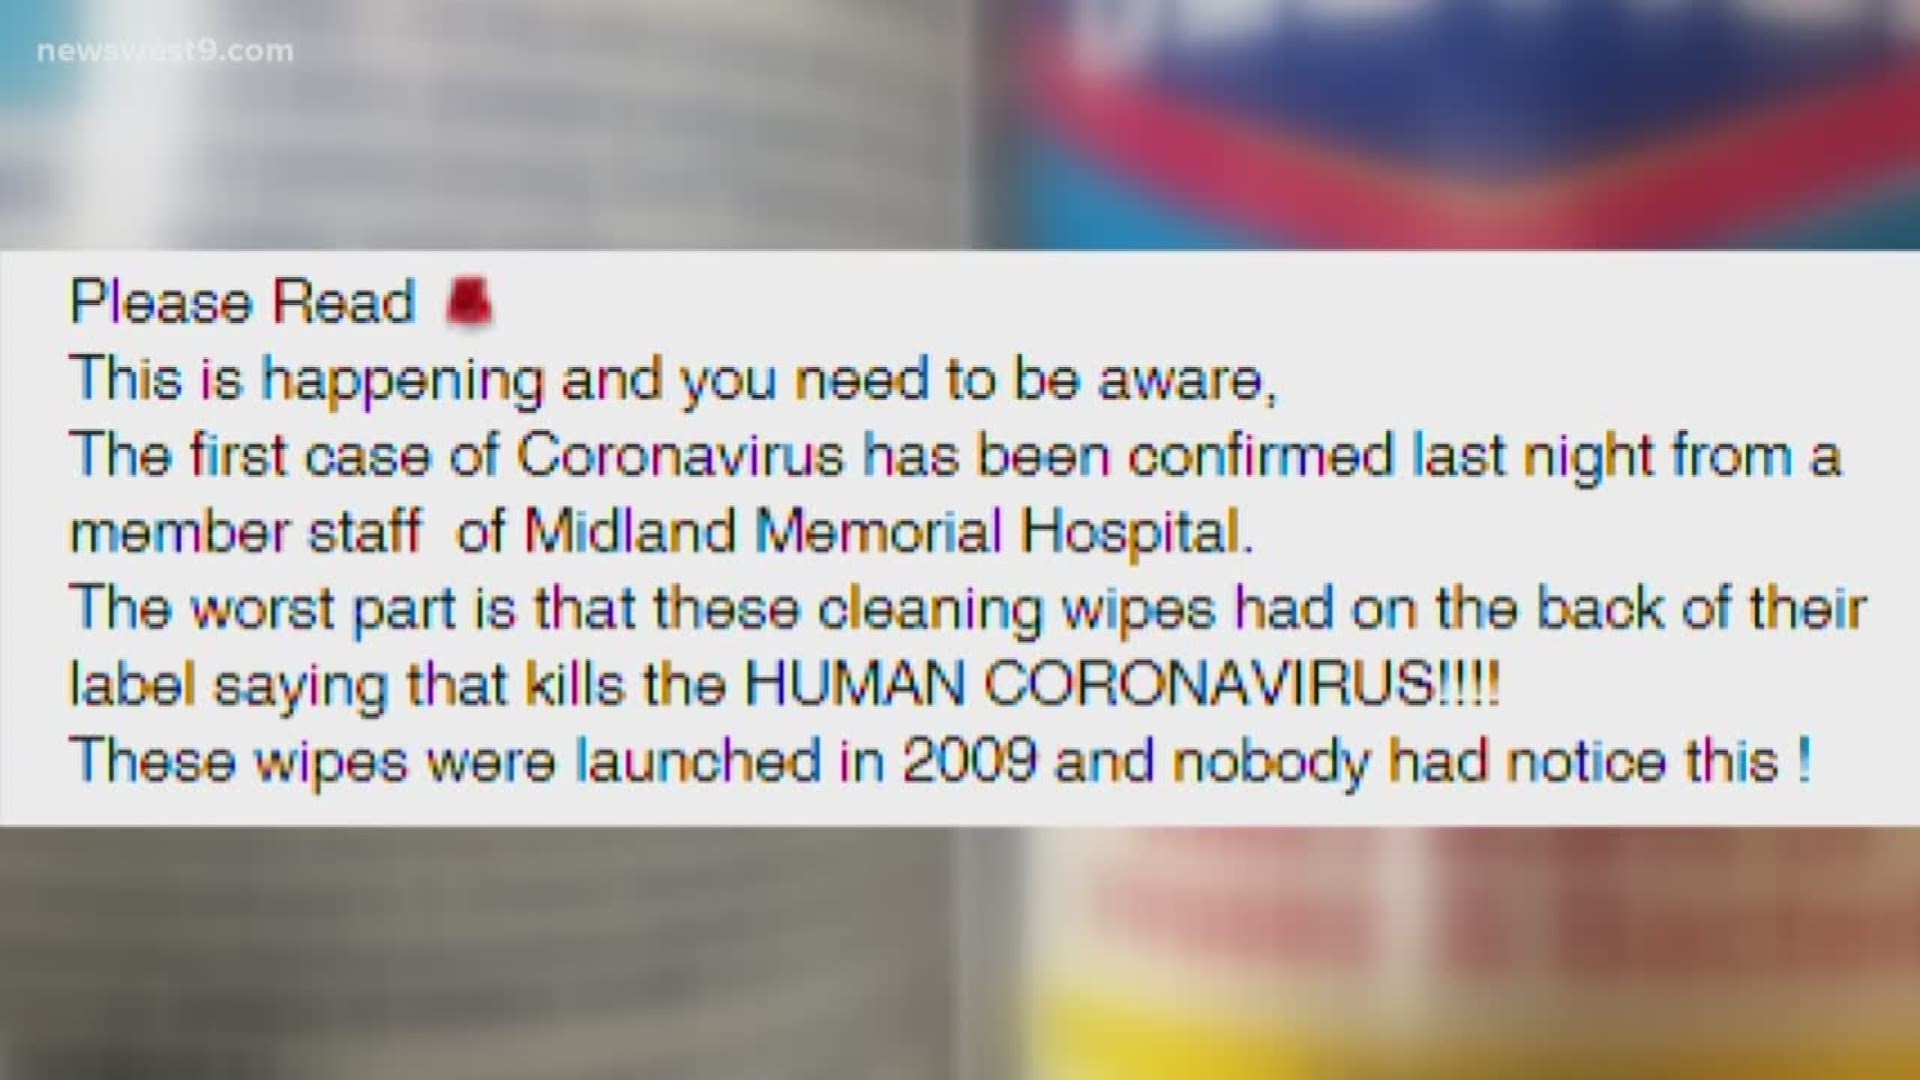 A Facebook post was circulating on saying a case of the Coronavirus was confirmed at Midland Memorial Hospital.